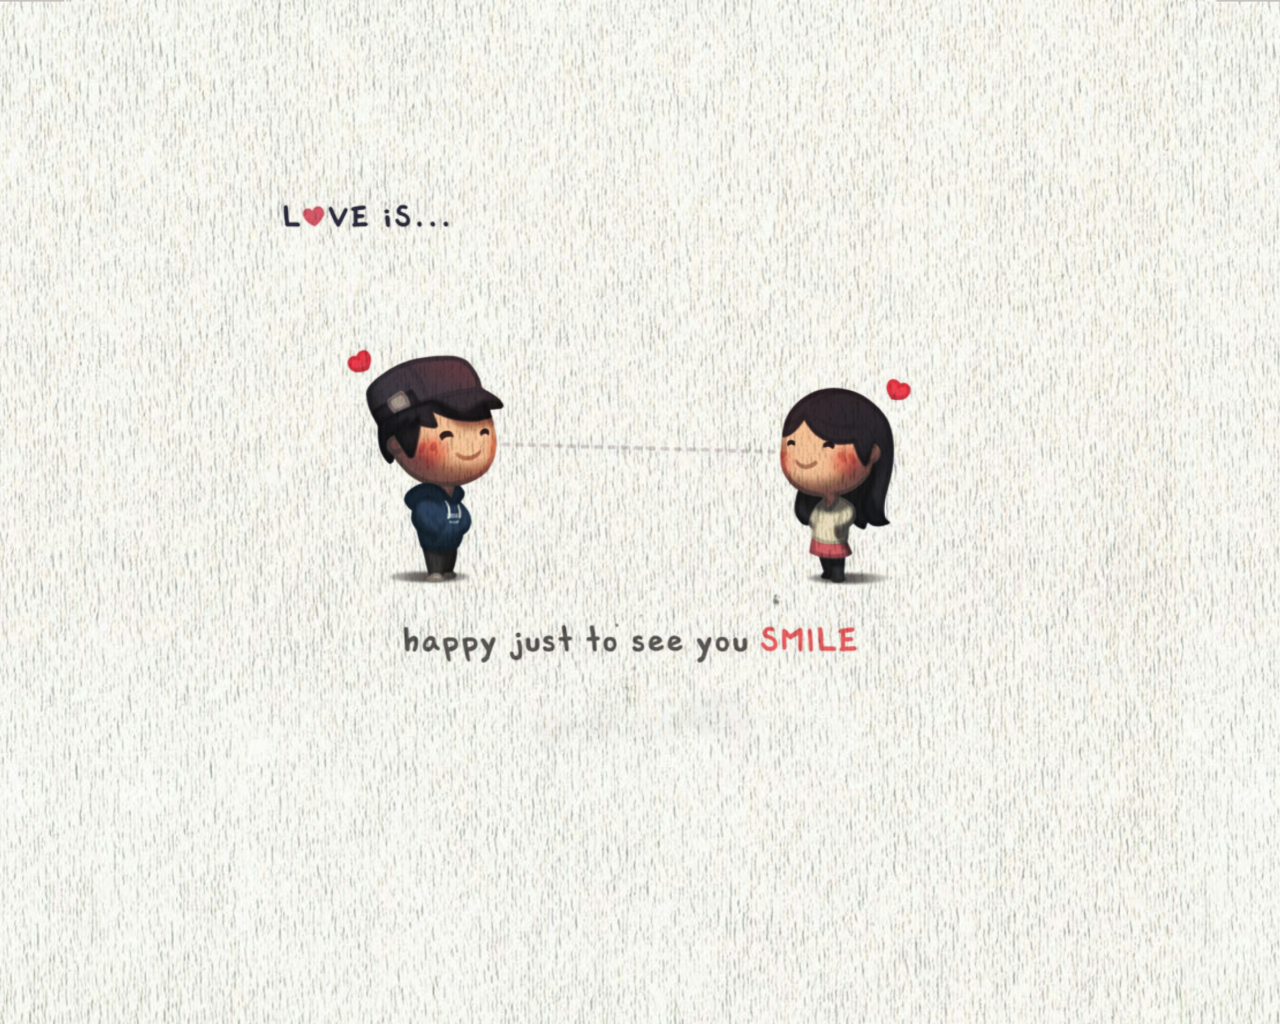 Das Love Is Happy Just To See You Smile Wallpaper 1280x1024